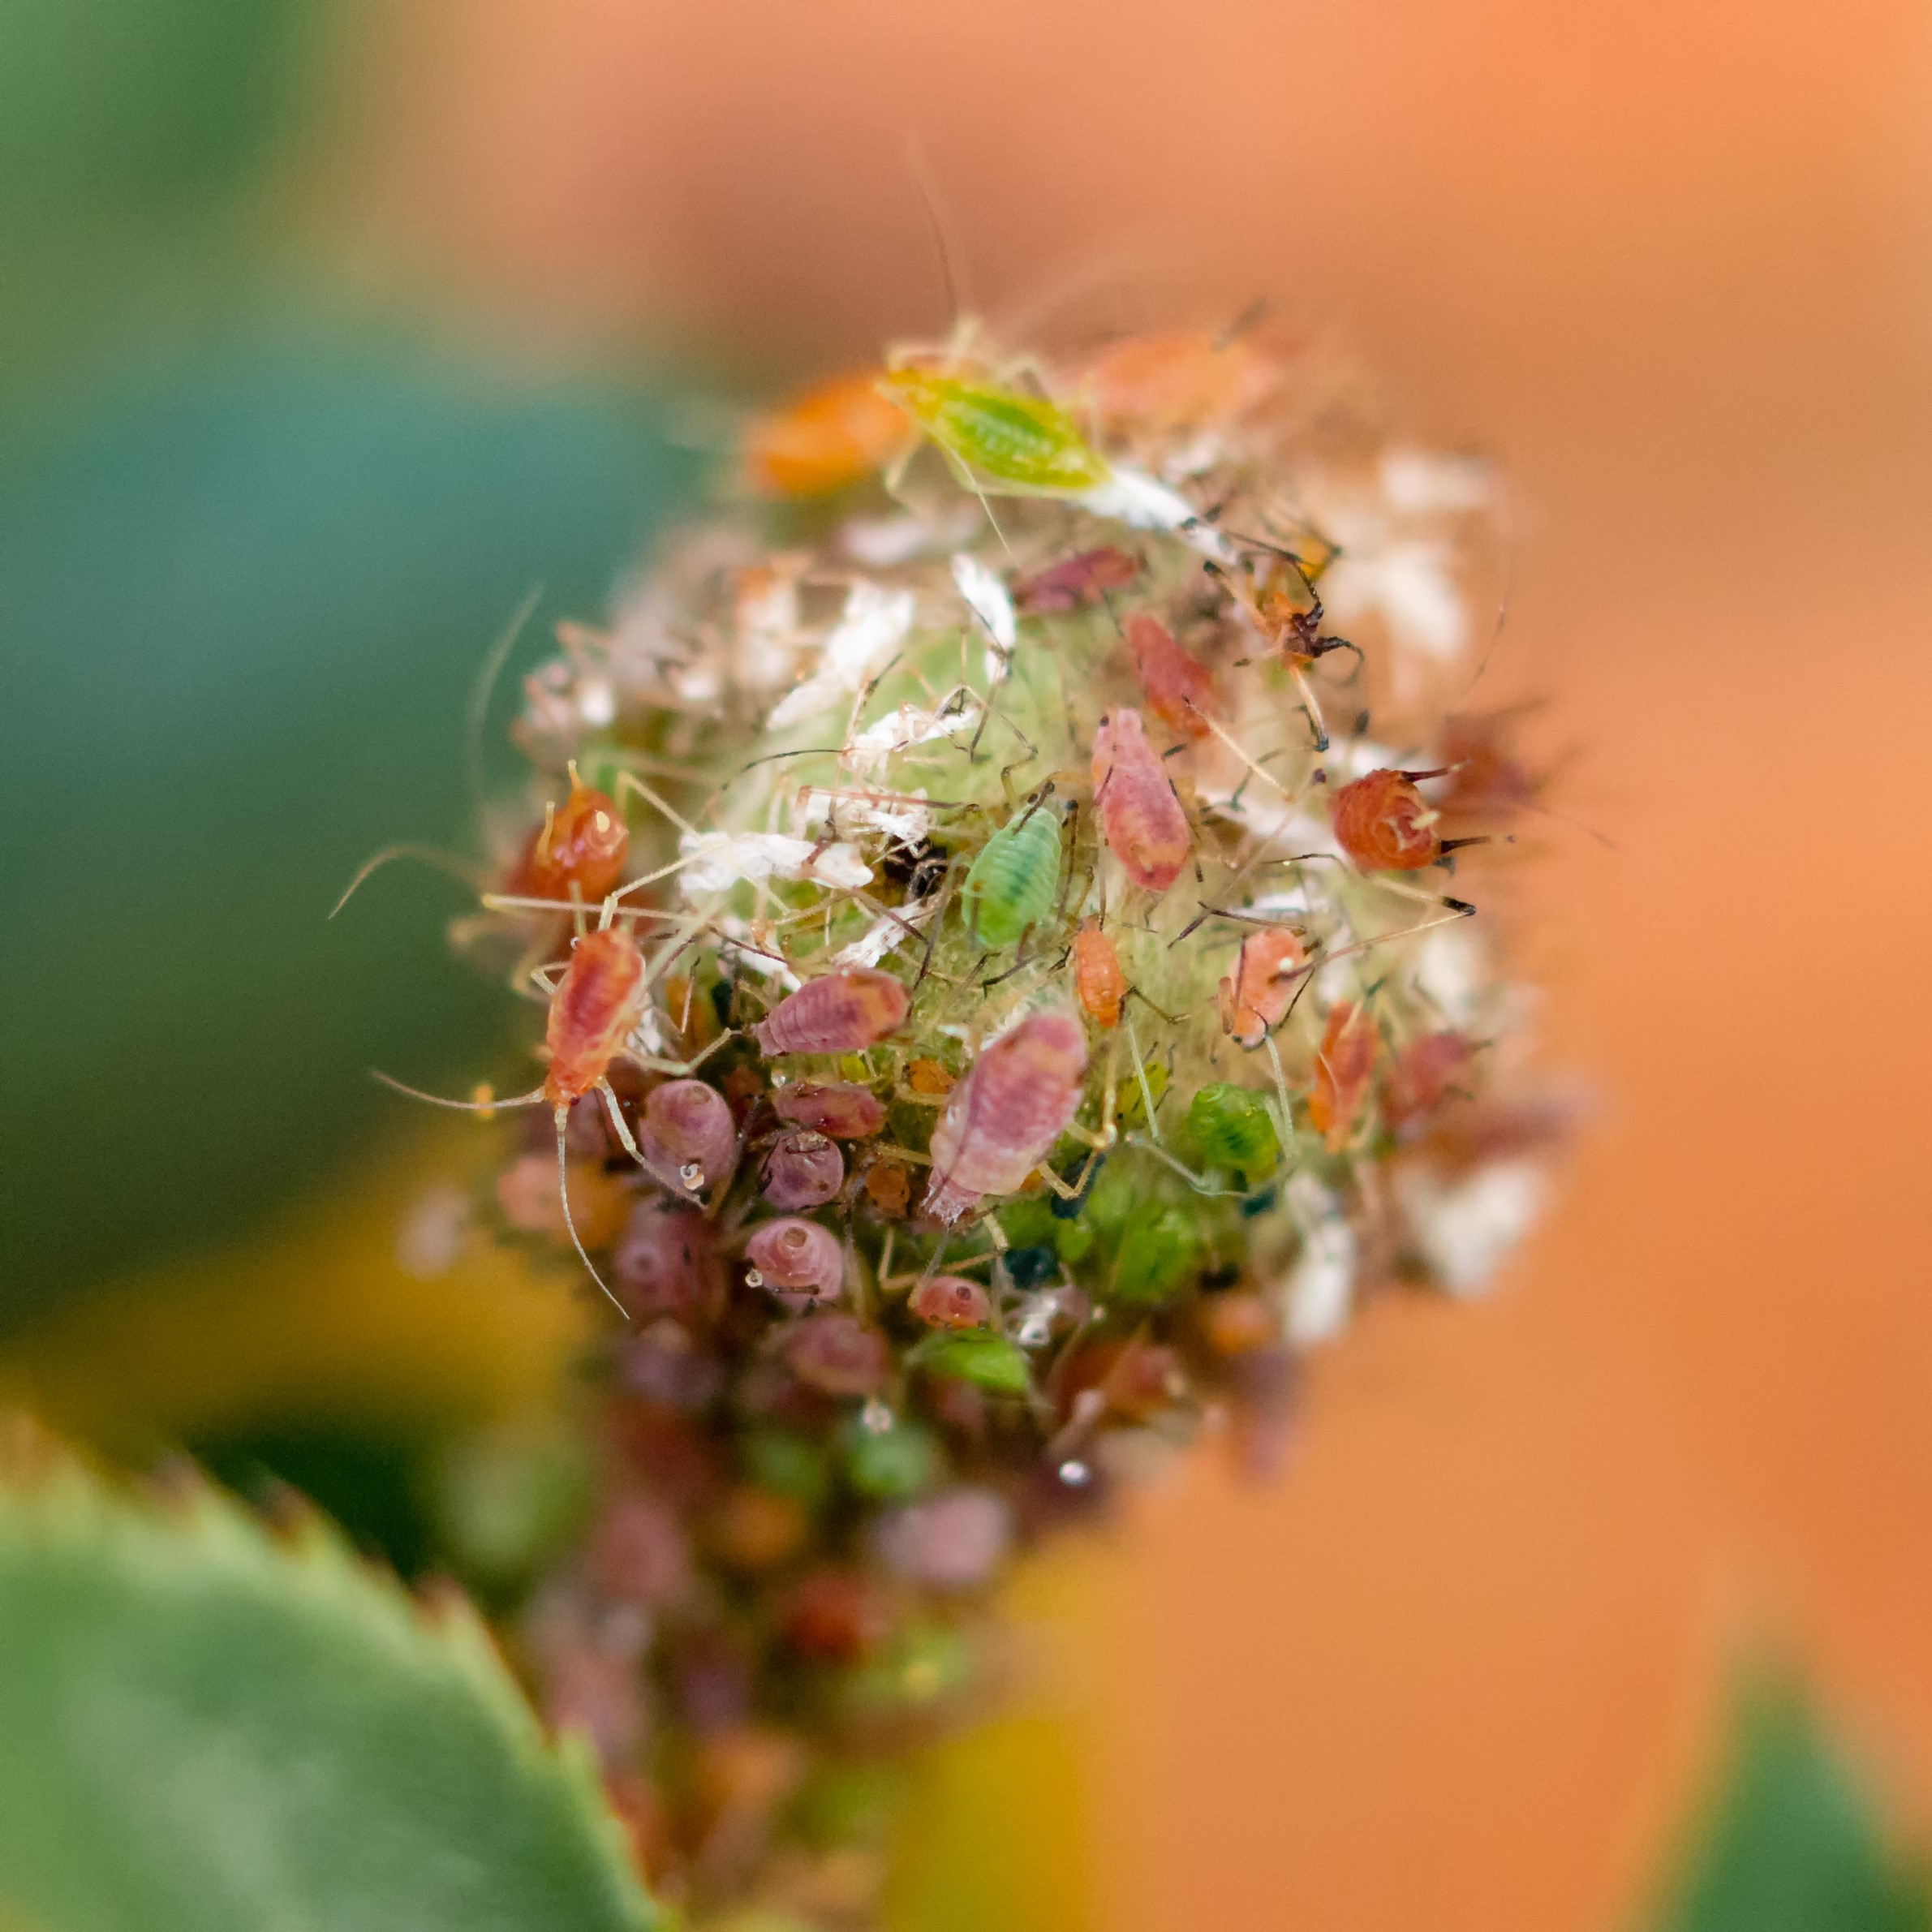 Image of aphids on a rose bud